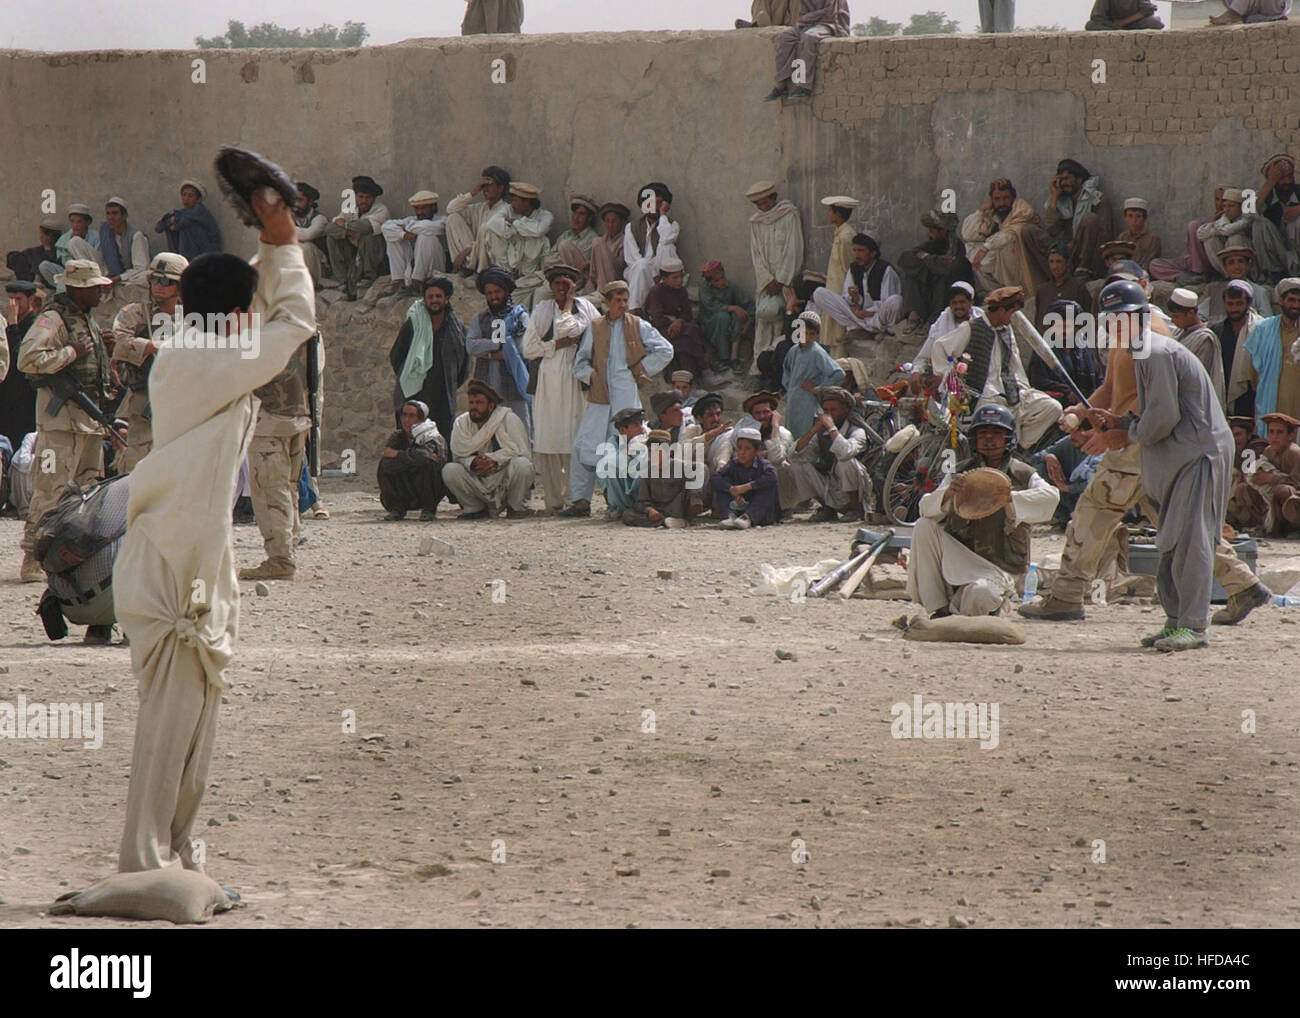 A large crowd of local Afghani villagers gathered at Camp Harriman, located in the Orgun Province of Afghanistan, to watch the first ever Afghani Little League Baseball Teams, consisting of two teams the Eagles ('Sahein' in Arabic) and The Afghan Club, play a game of baseball, during Operation ENDURING FREEDOM. Afghan teens playing American baseball game Stock Photo